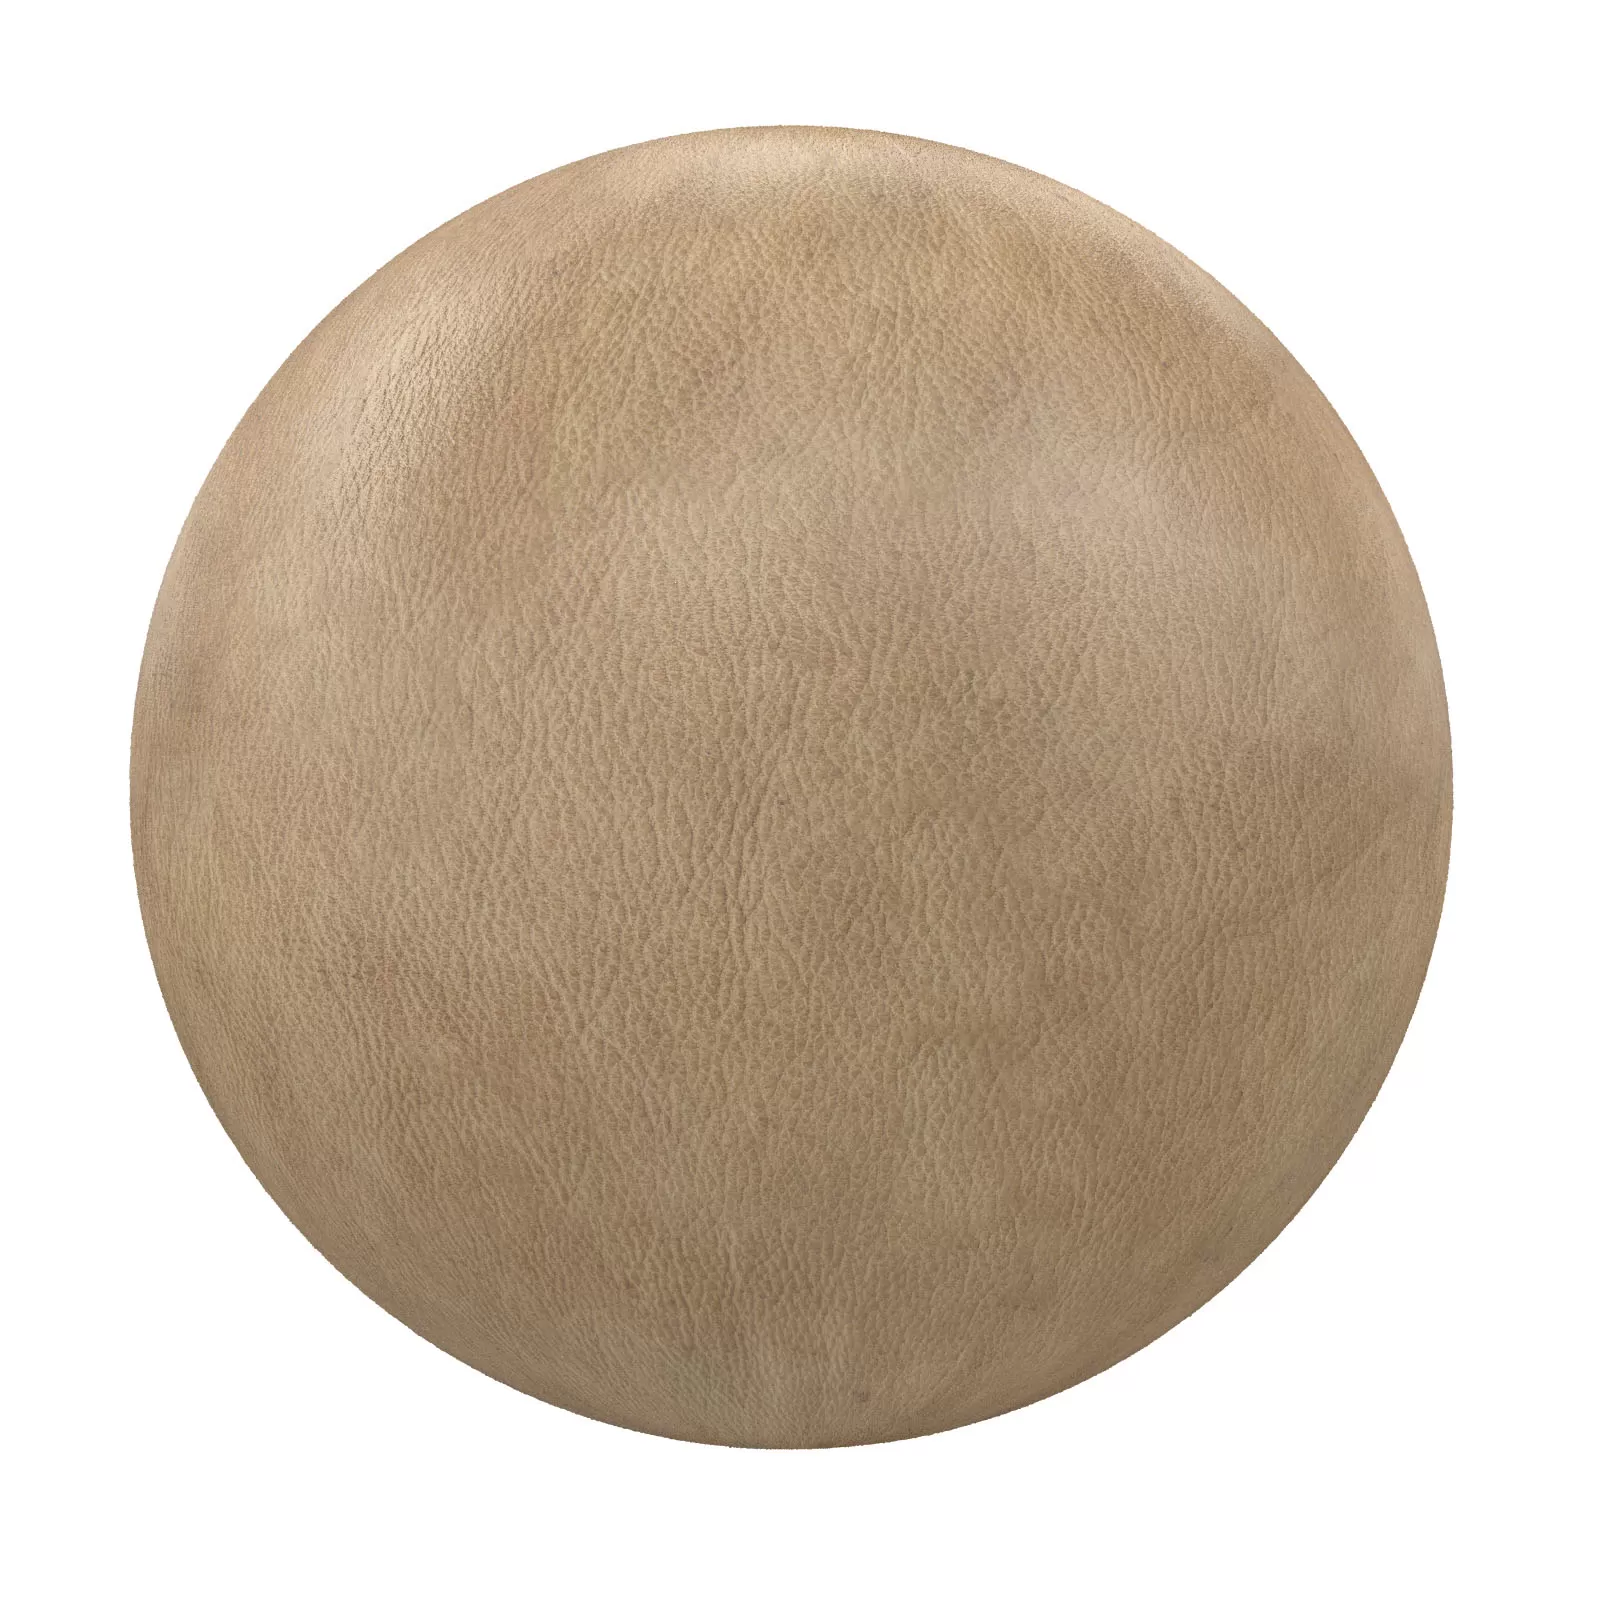 PBR CGAXIS TEXTURES – LEATHER – Beige Leather 8